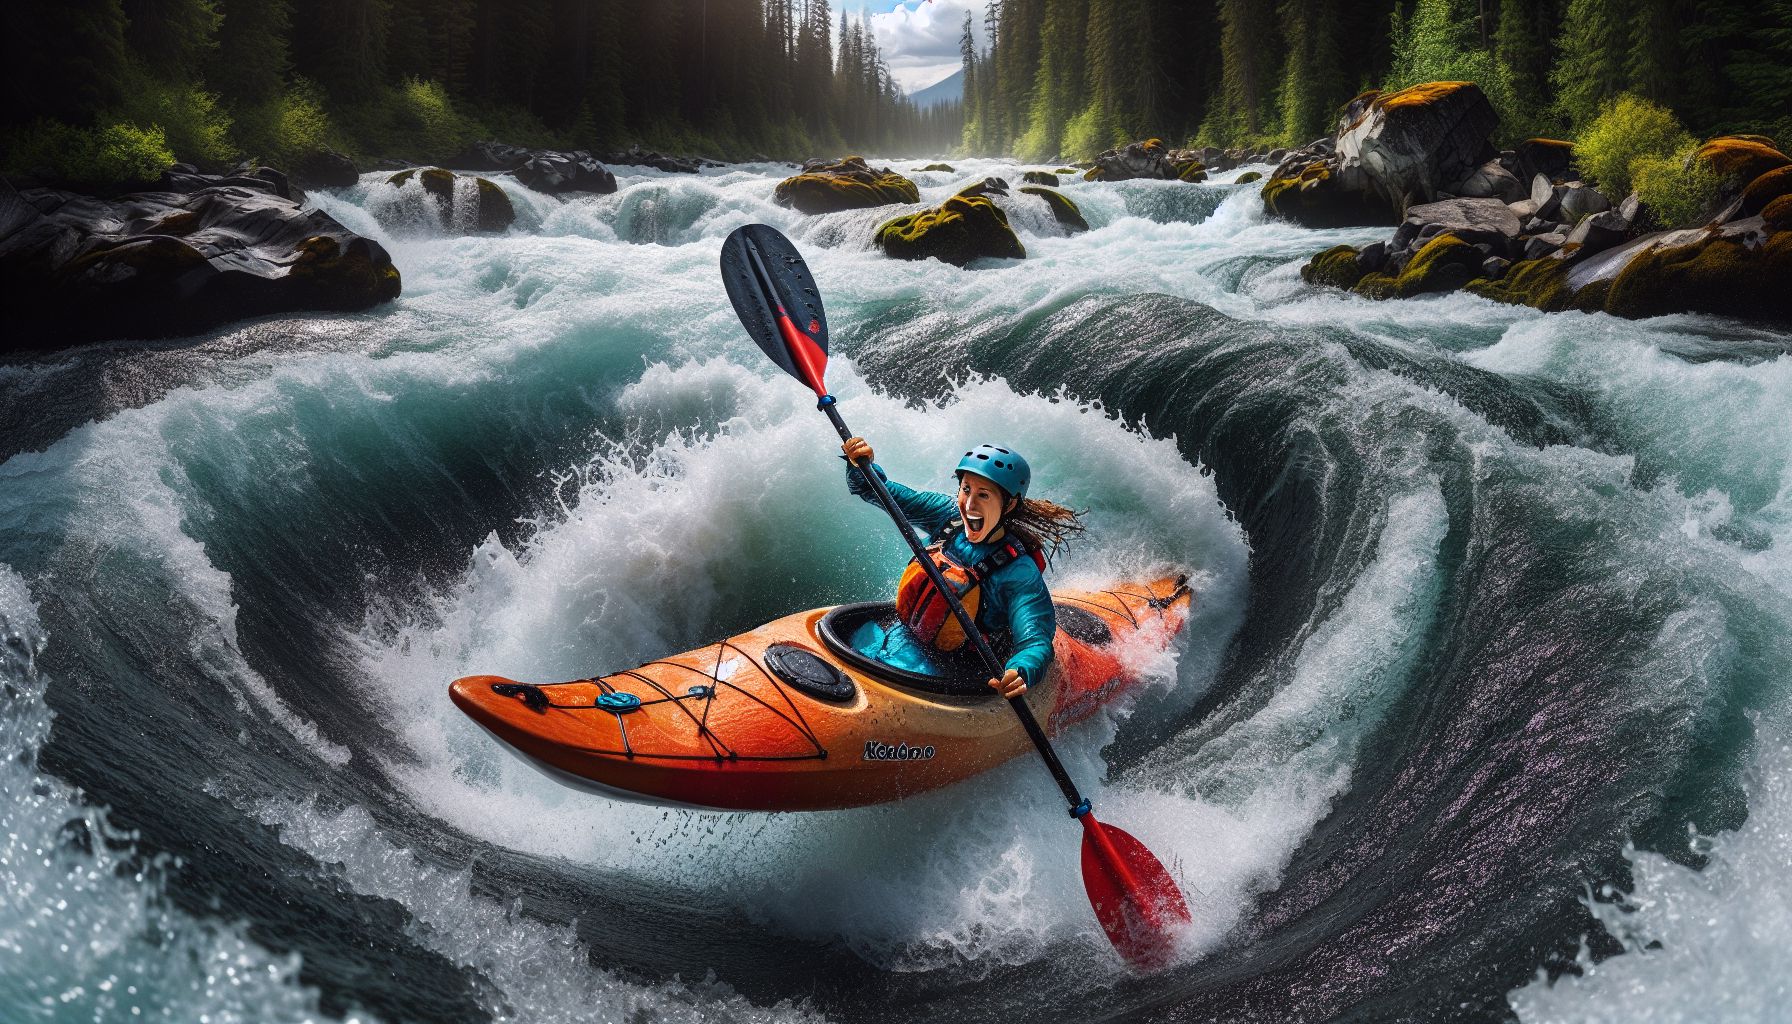 The Thrill and Adventure of Whitewater Kayaking – The Ultimate Water Sport